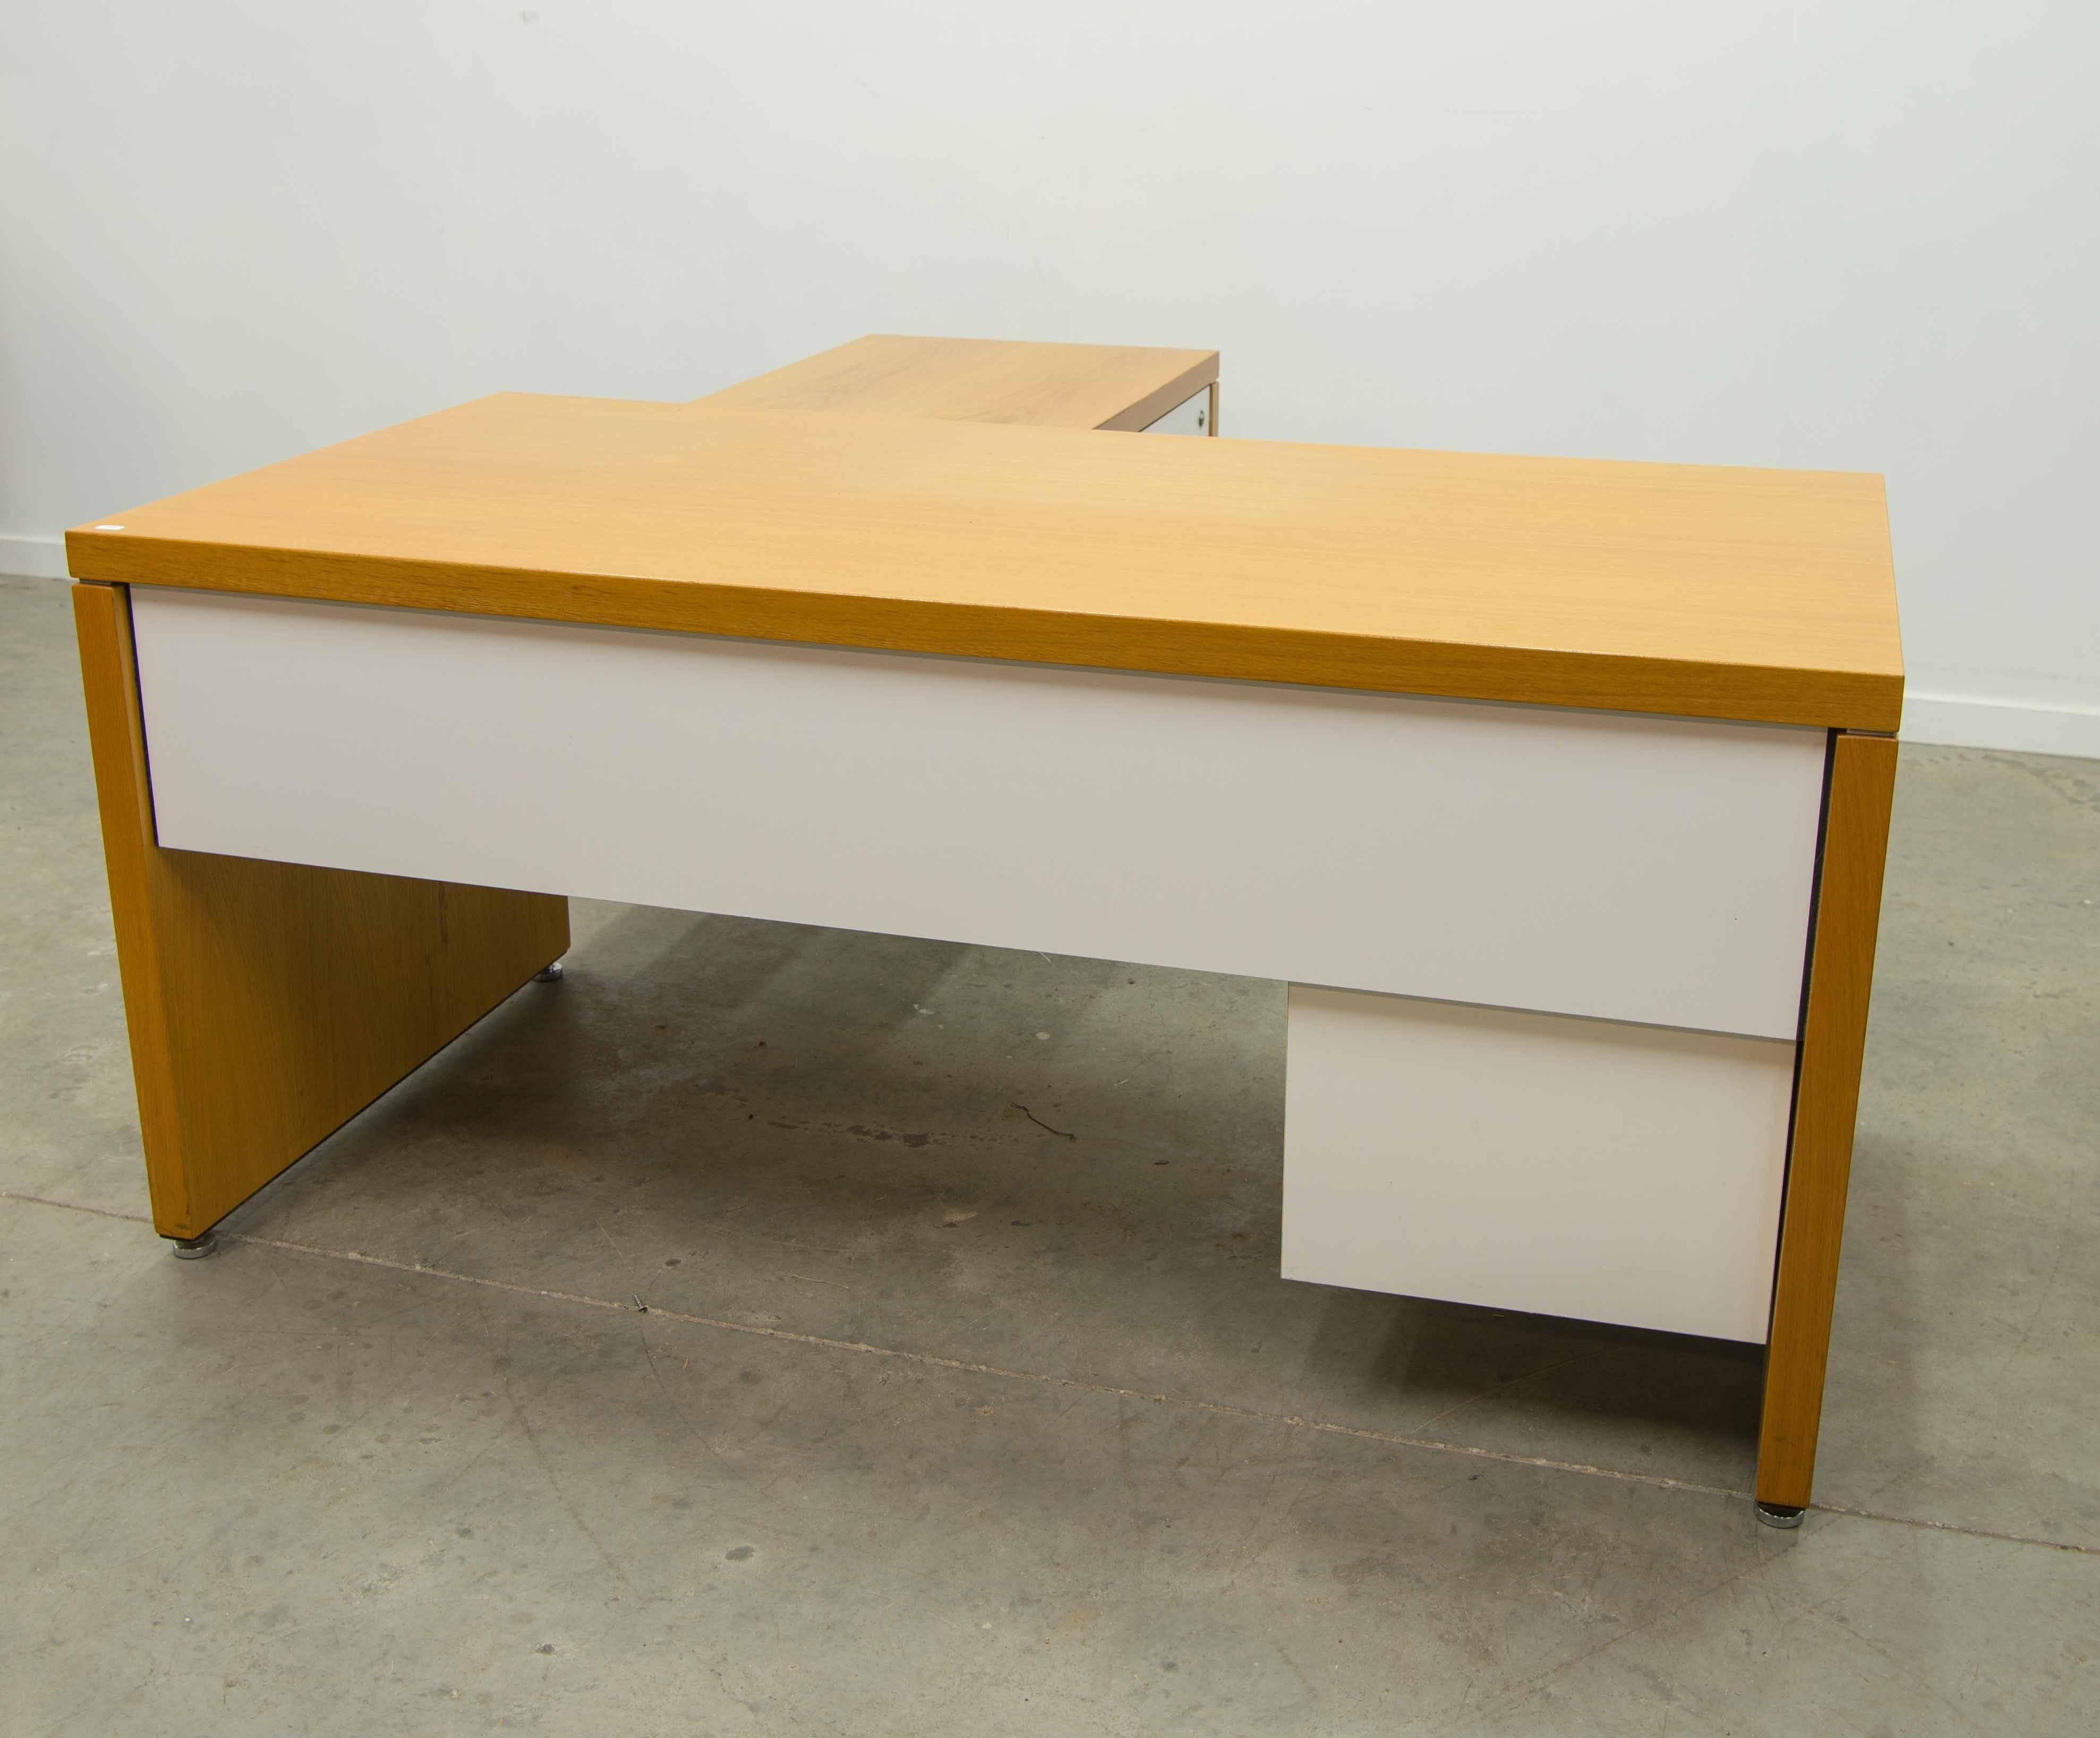 We have this desk set by William Stephens for Knoll. The set is made of two parts with different heights. There is a chrome edge separating the feet from the top. There are white room dividers on the table and a white drawers set. The drawers show